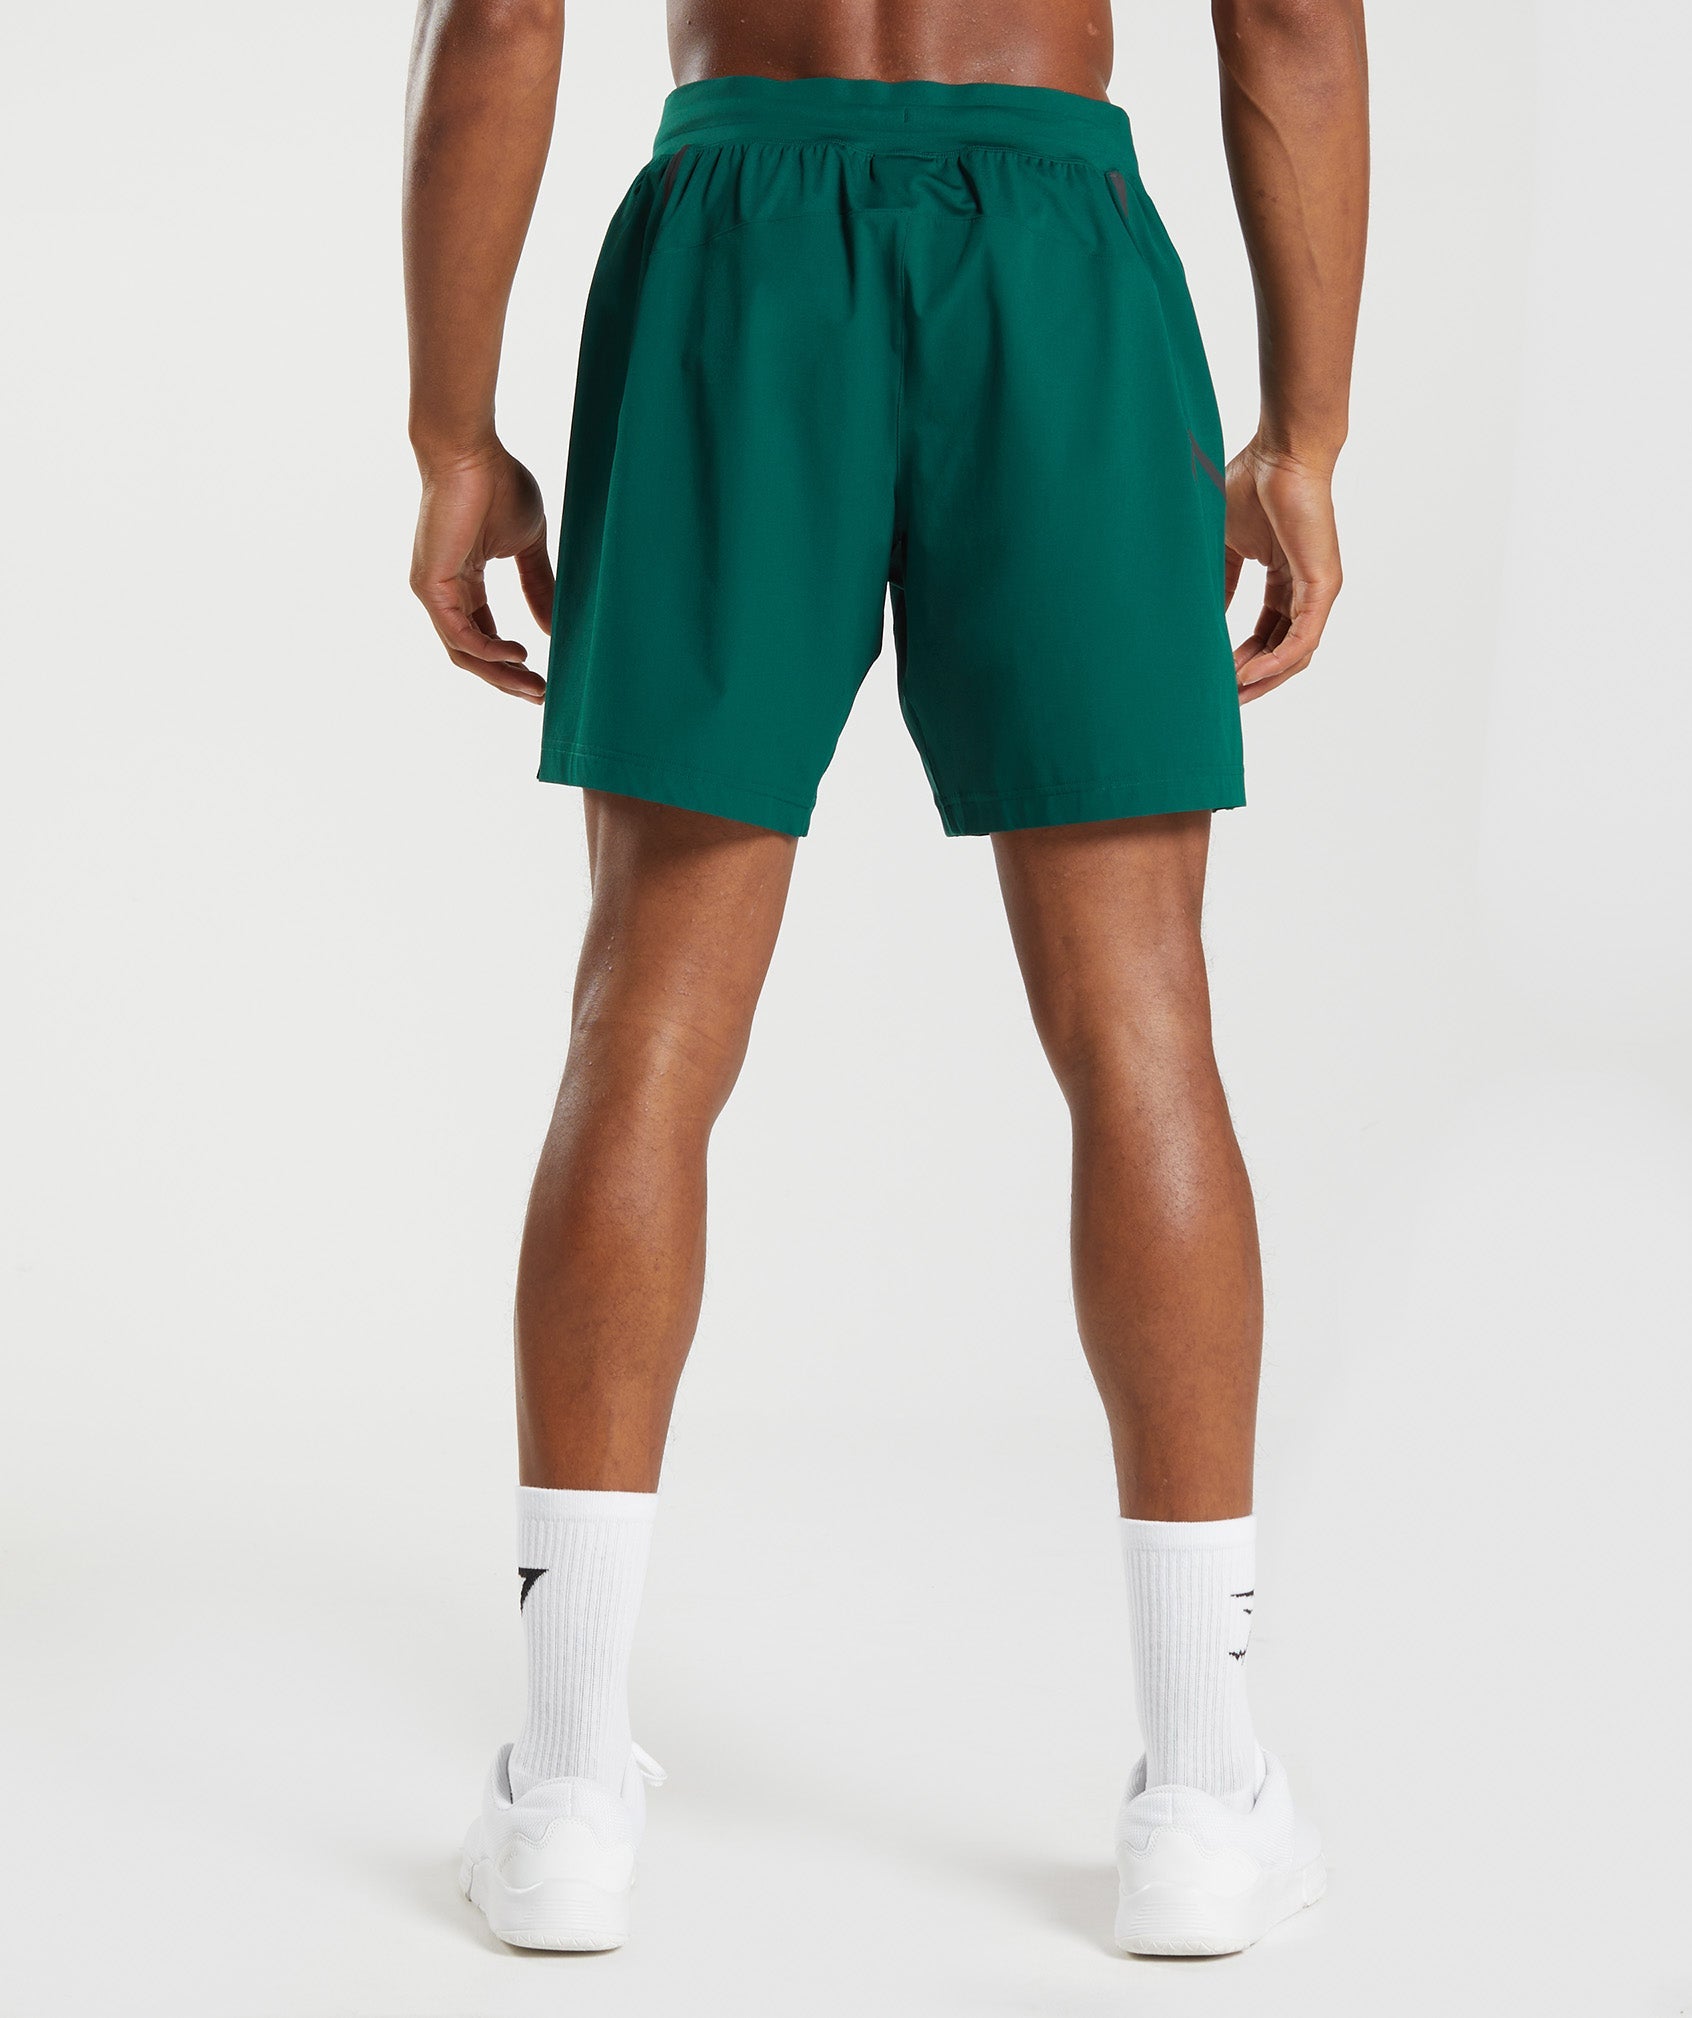 Apex 8" Function Shorts in Woodland Green - view 2